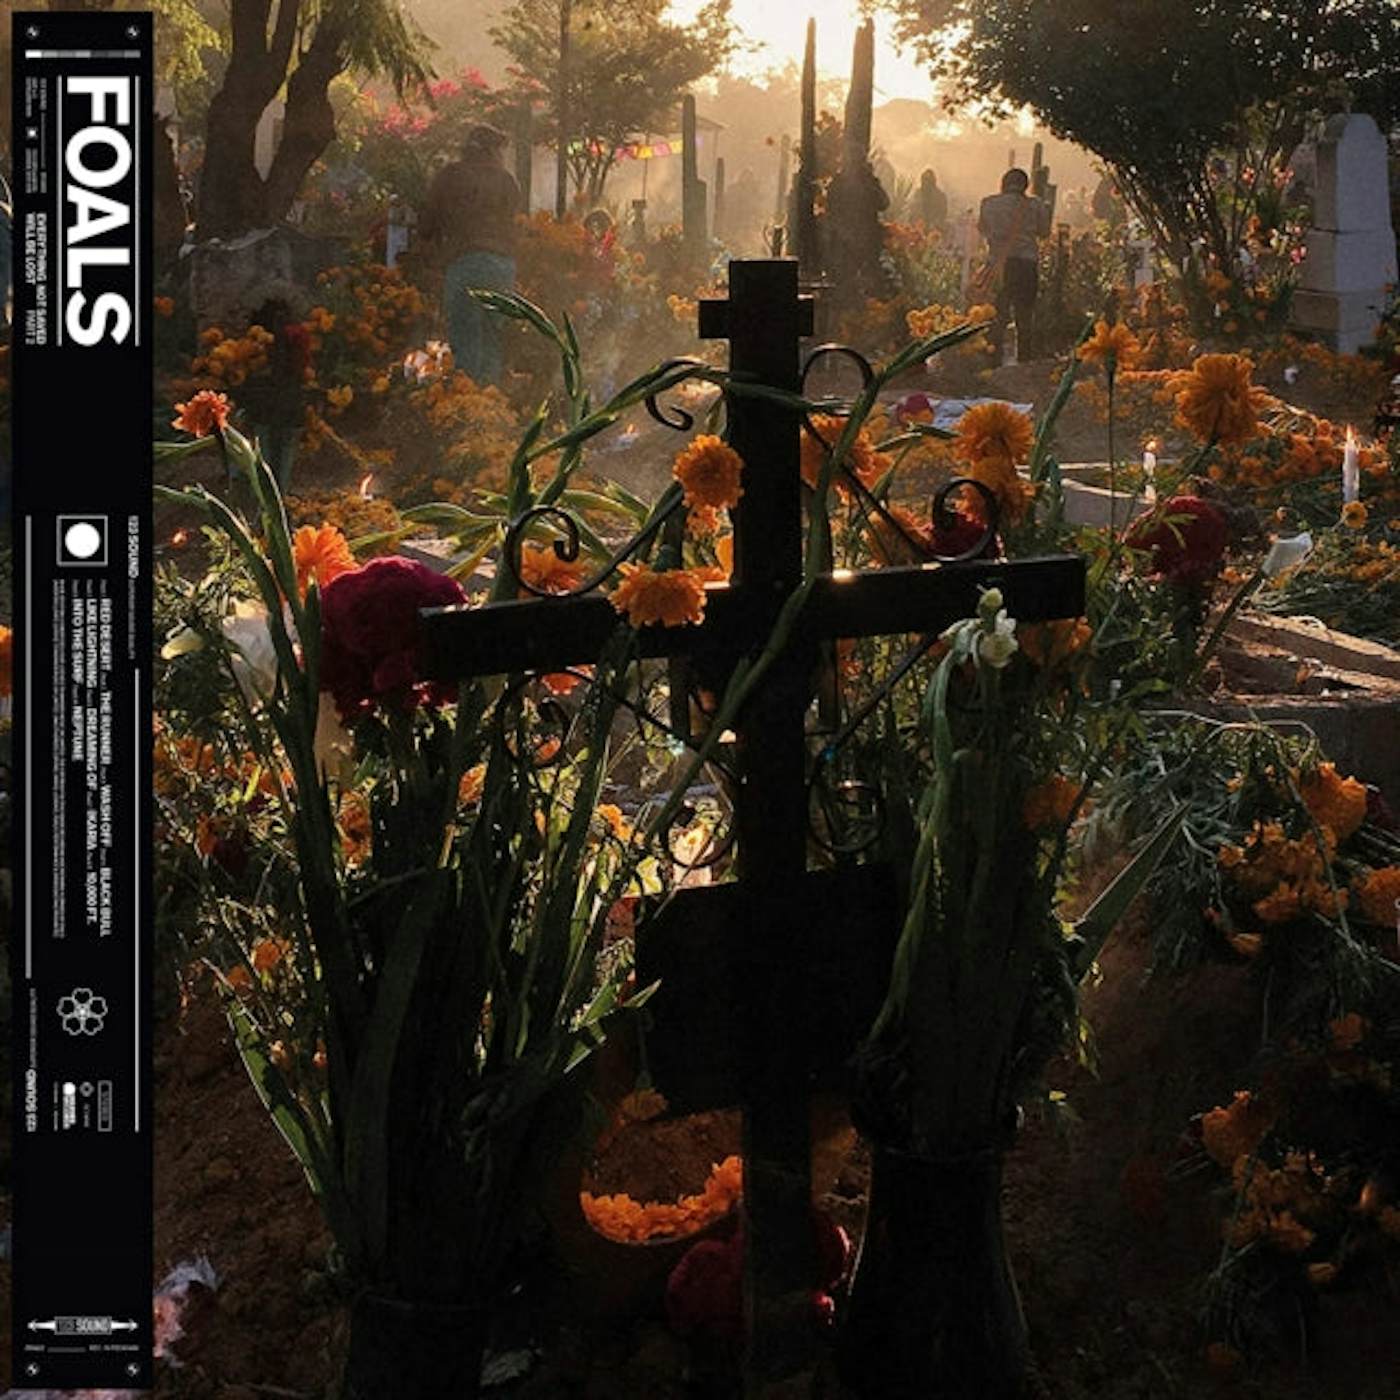 Foals LP Vinyl Record - Everything Not Saved Will Be Lost Part 2